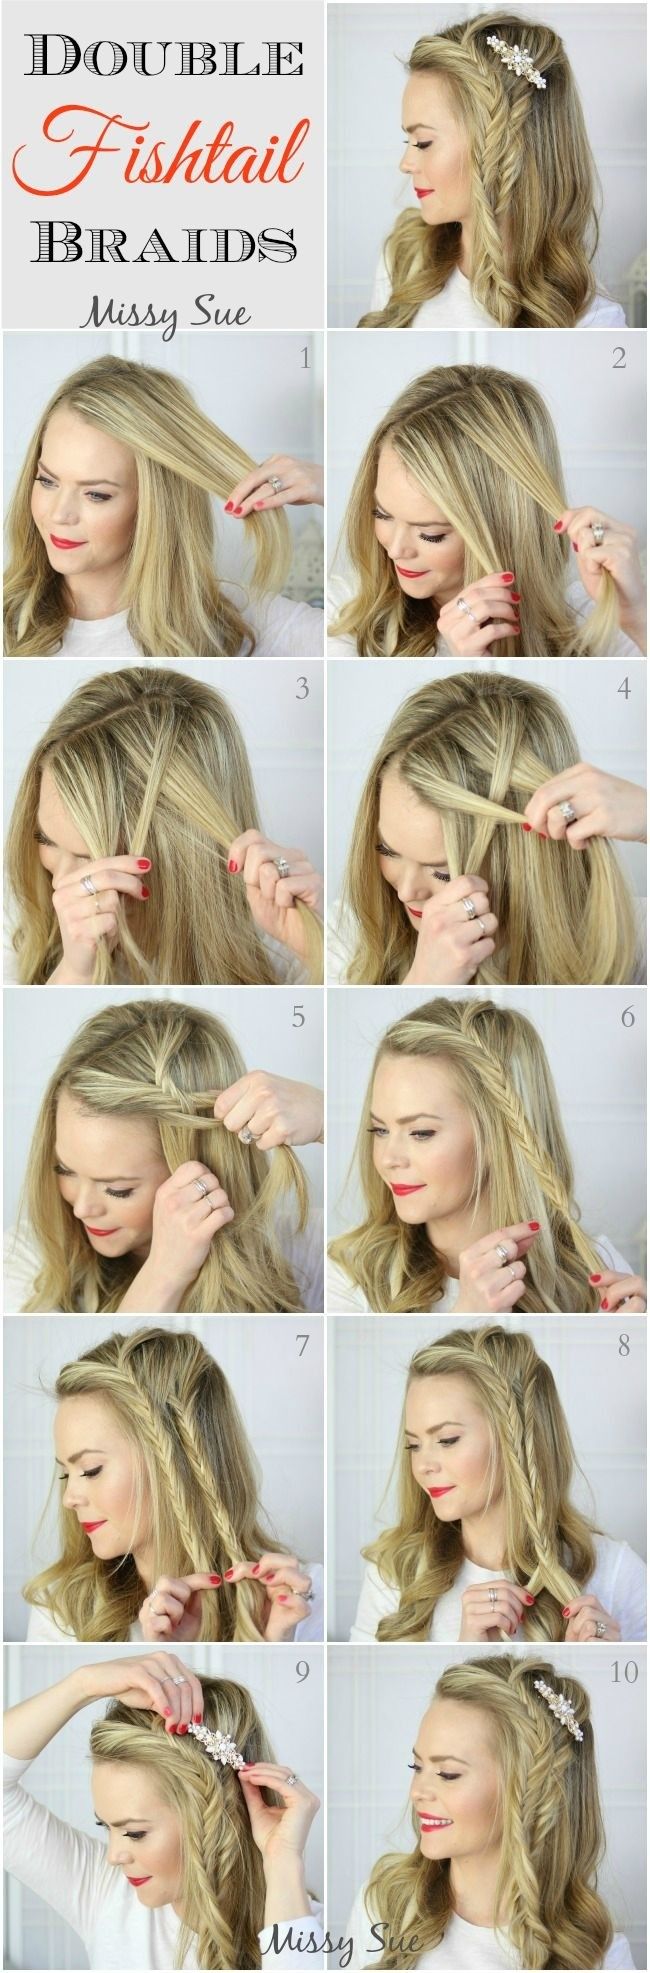 15 Gorgeous DIY Hairstyle Ideas To Make You Look Stylish